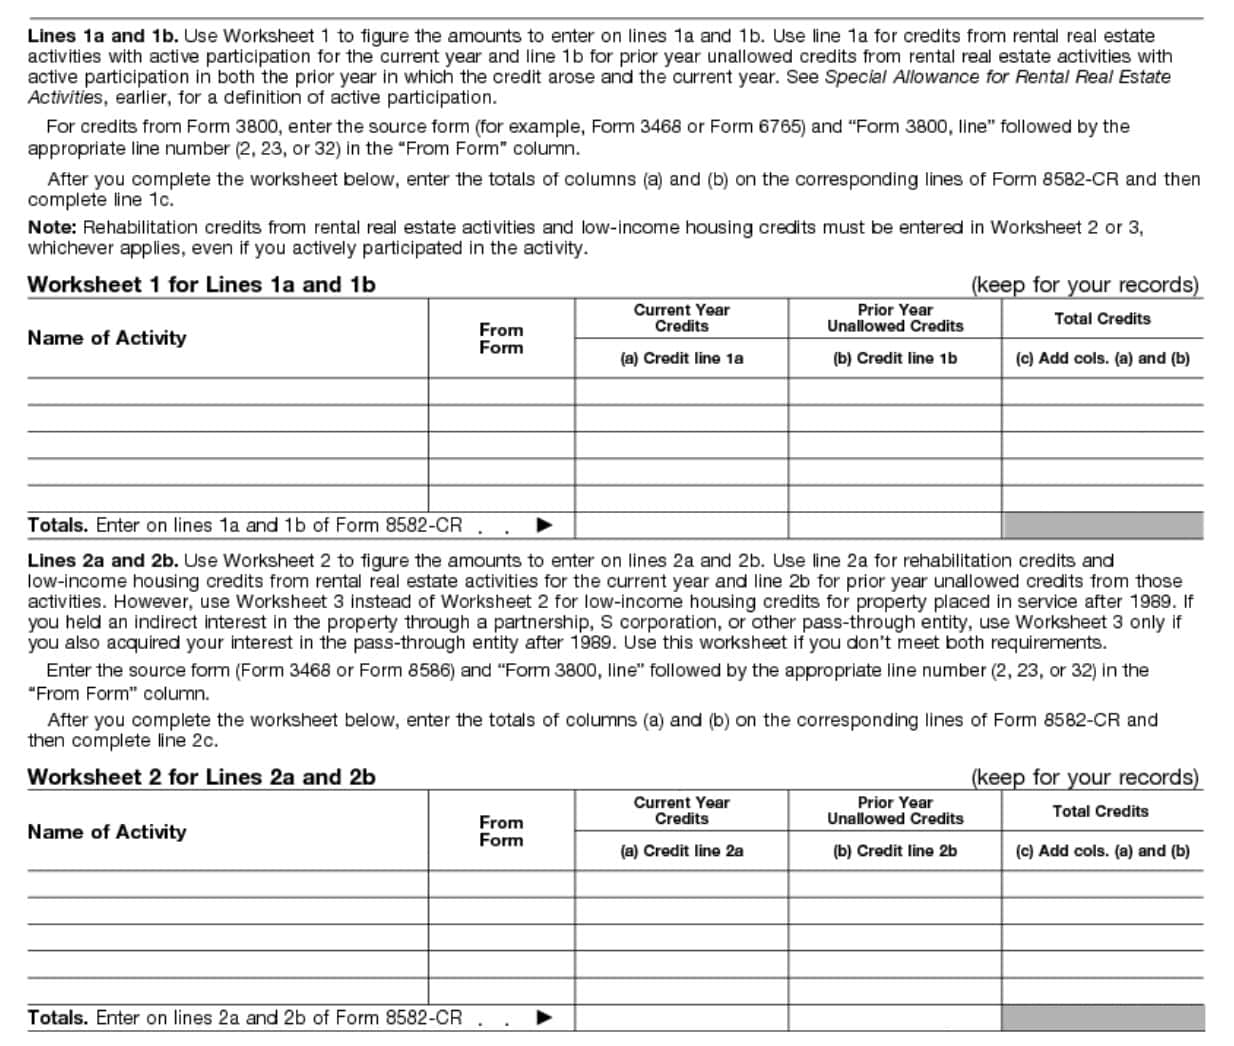 irs form 8582-cr, worksheets 1 and 2